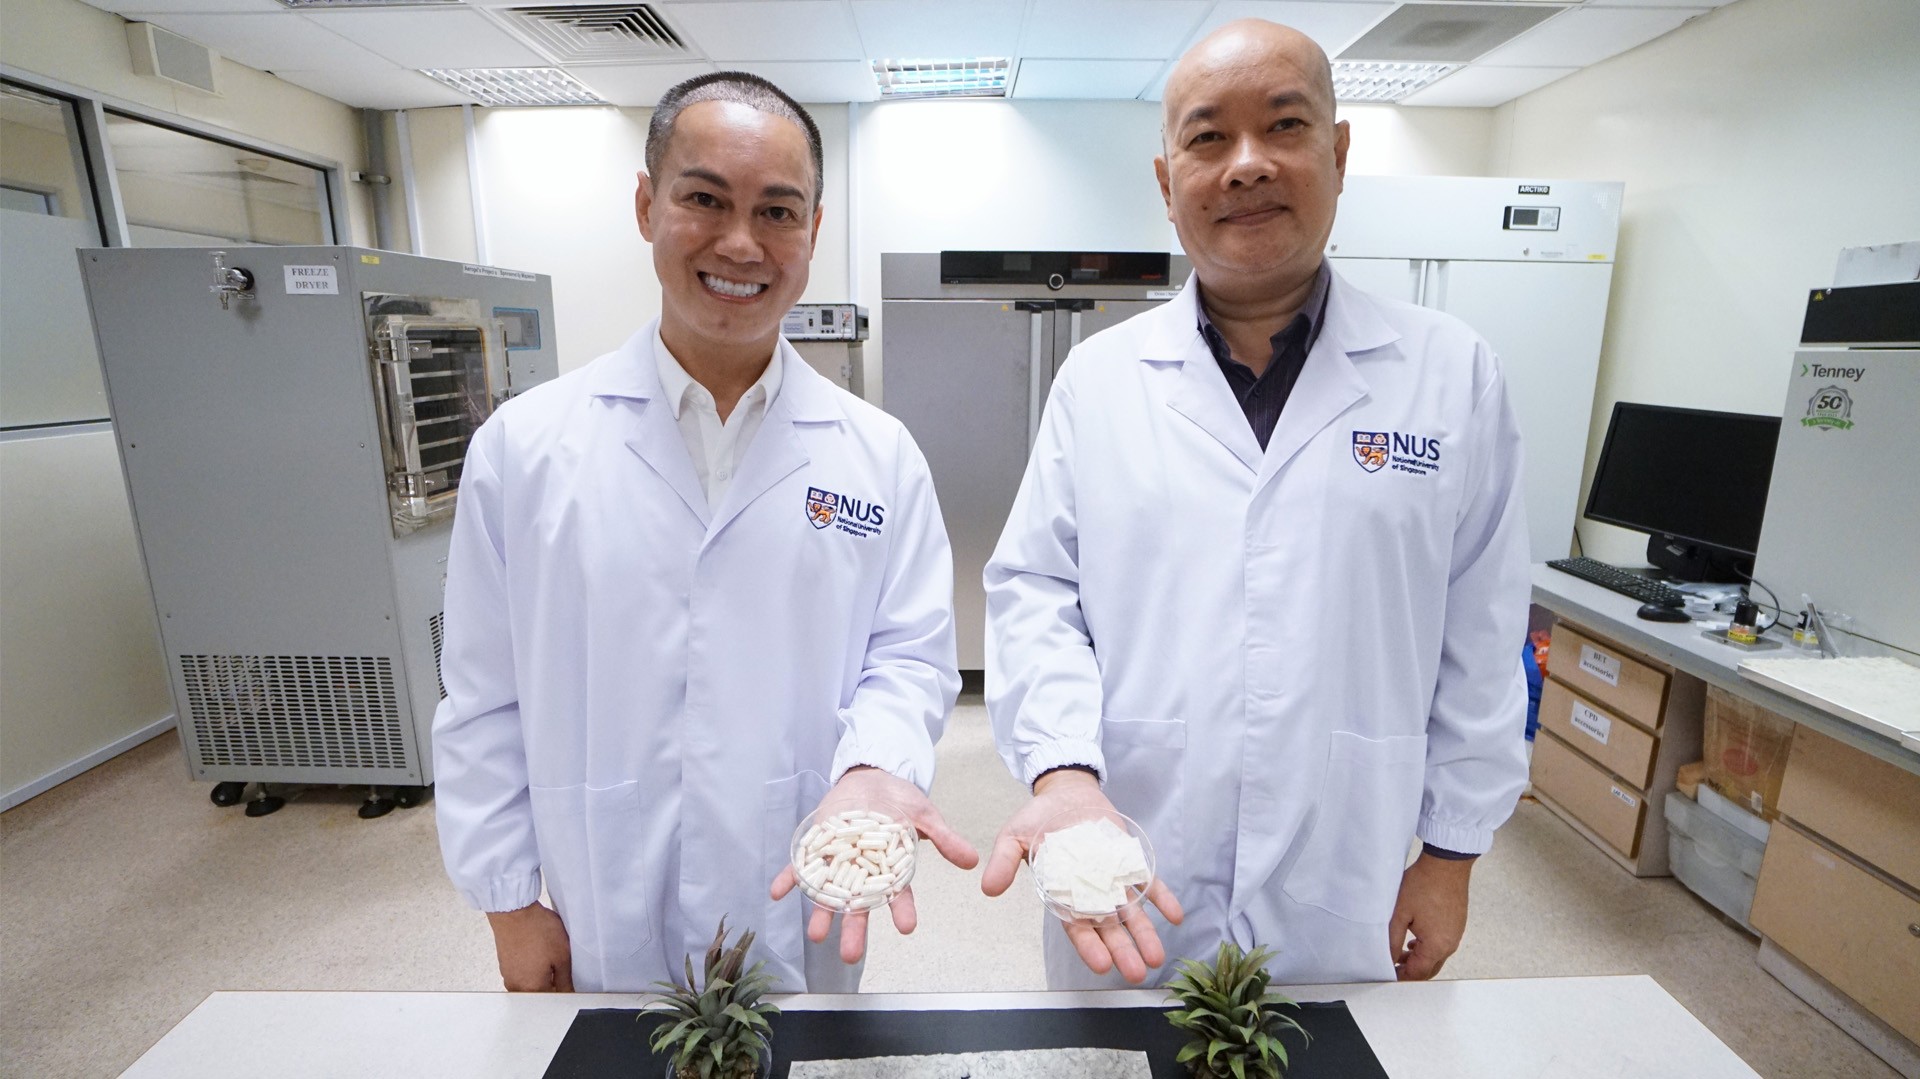 Associate Professor Phan Toan Thang (right) from the Department of Surgery at the NUS Yong Loo Lin School of Medicine worked with the research team to develop the material